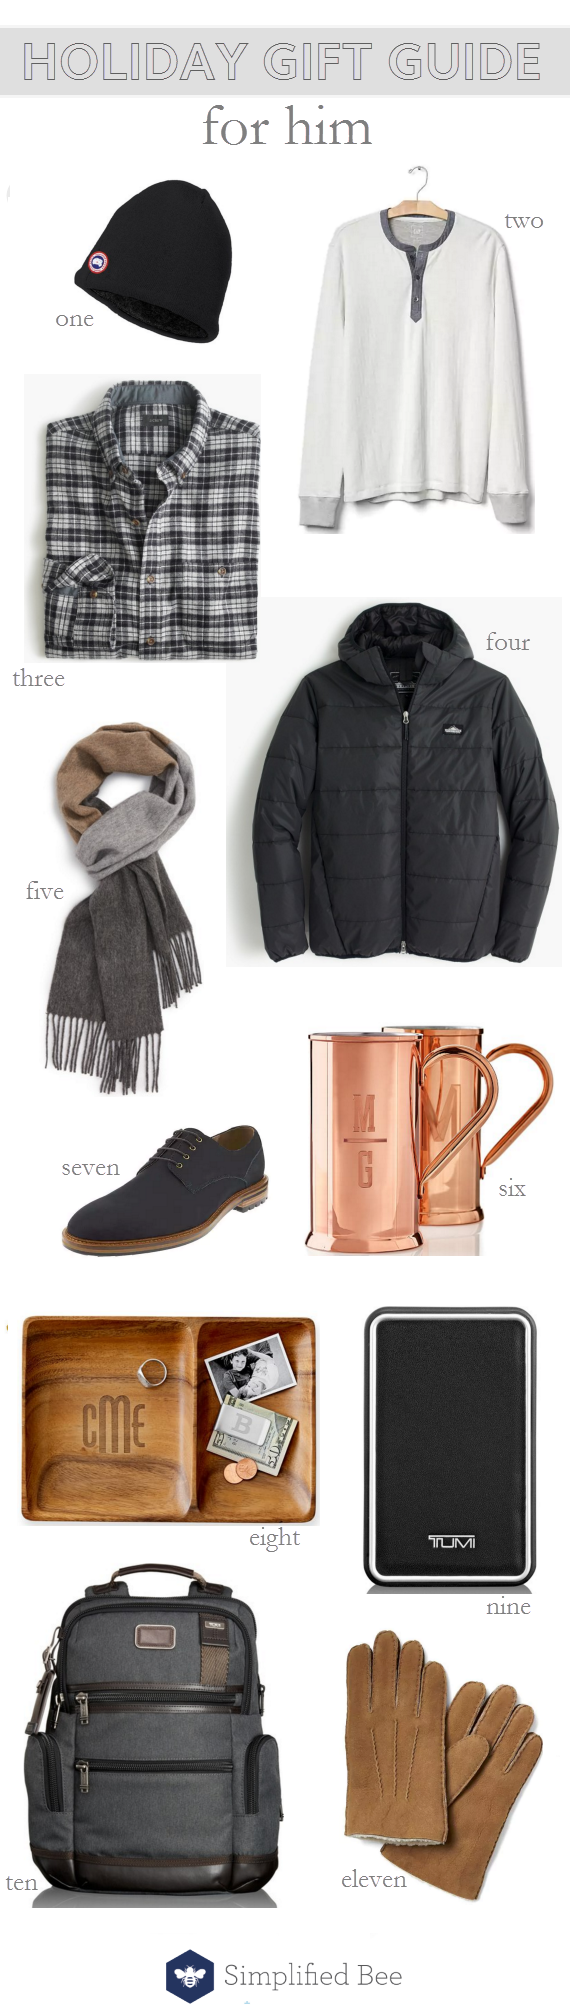 holiday gift guide 2016 // for him // via @simplifiedbee